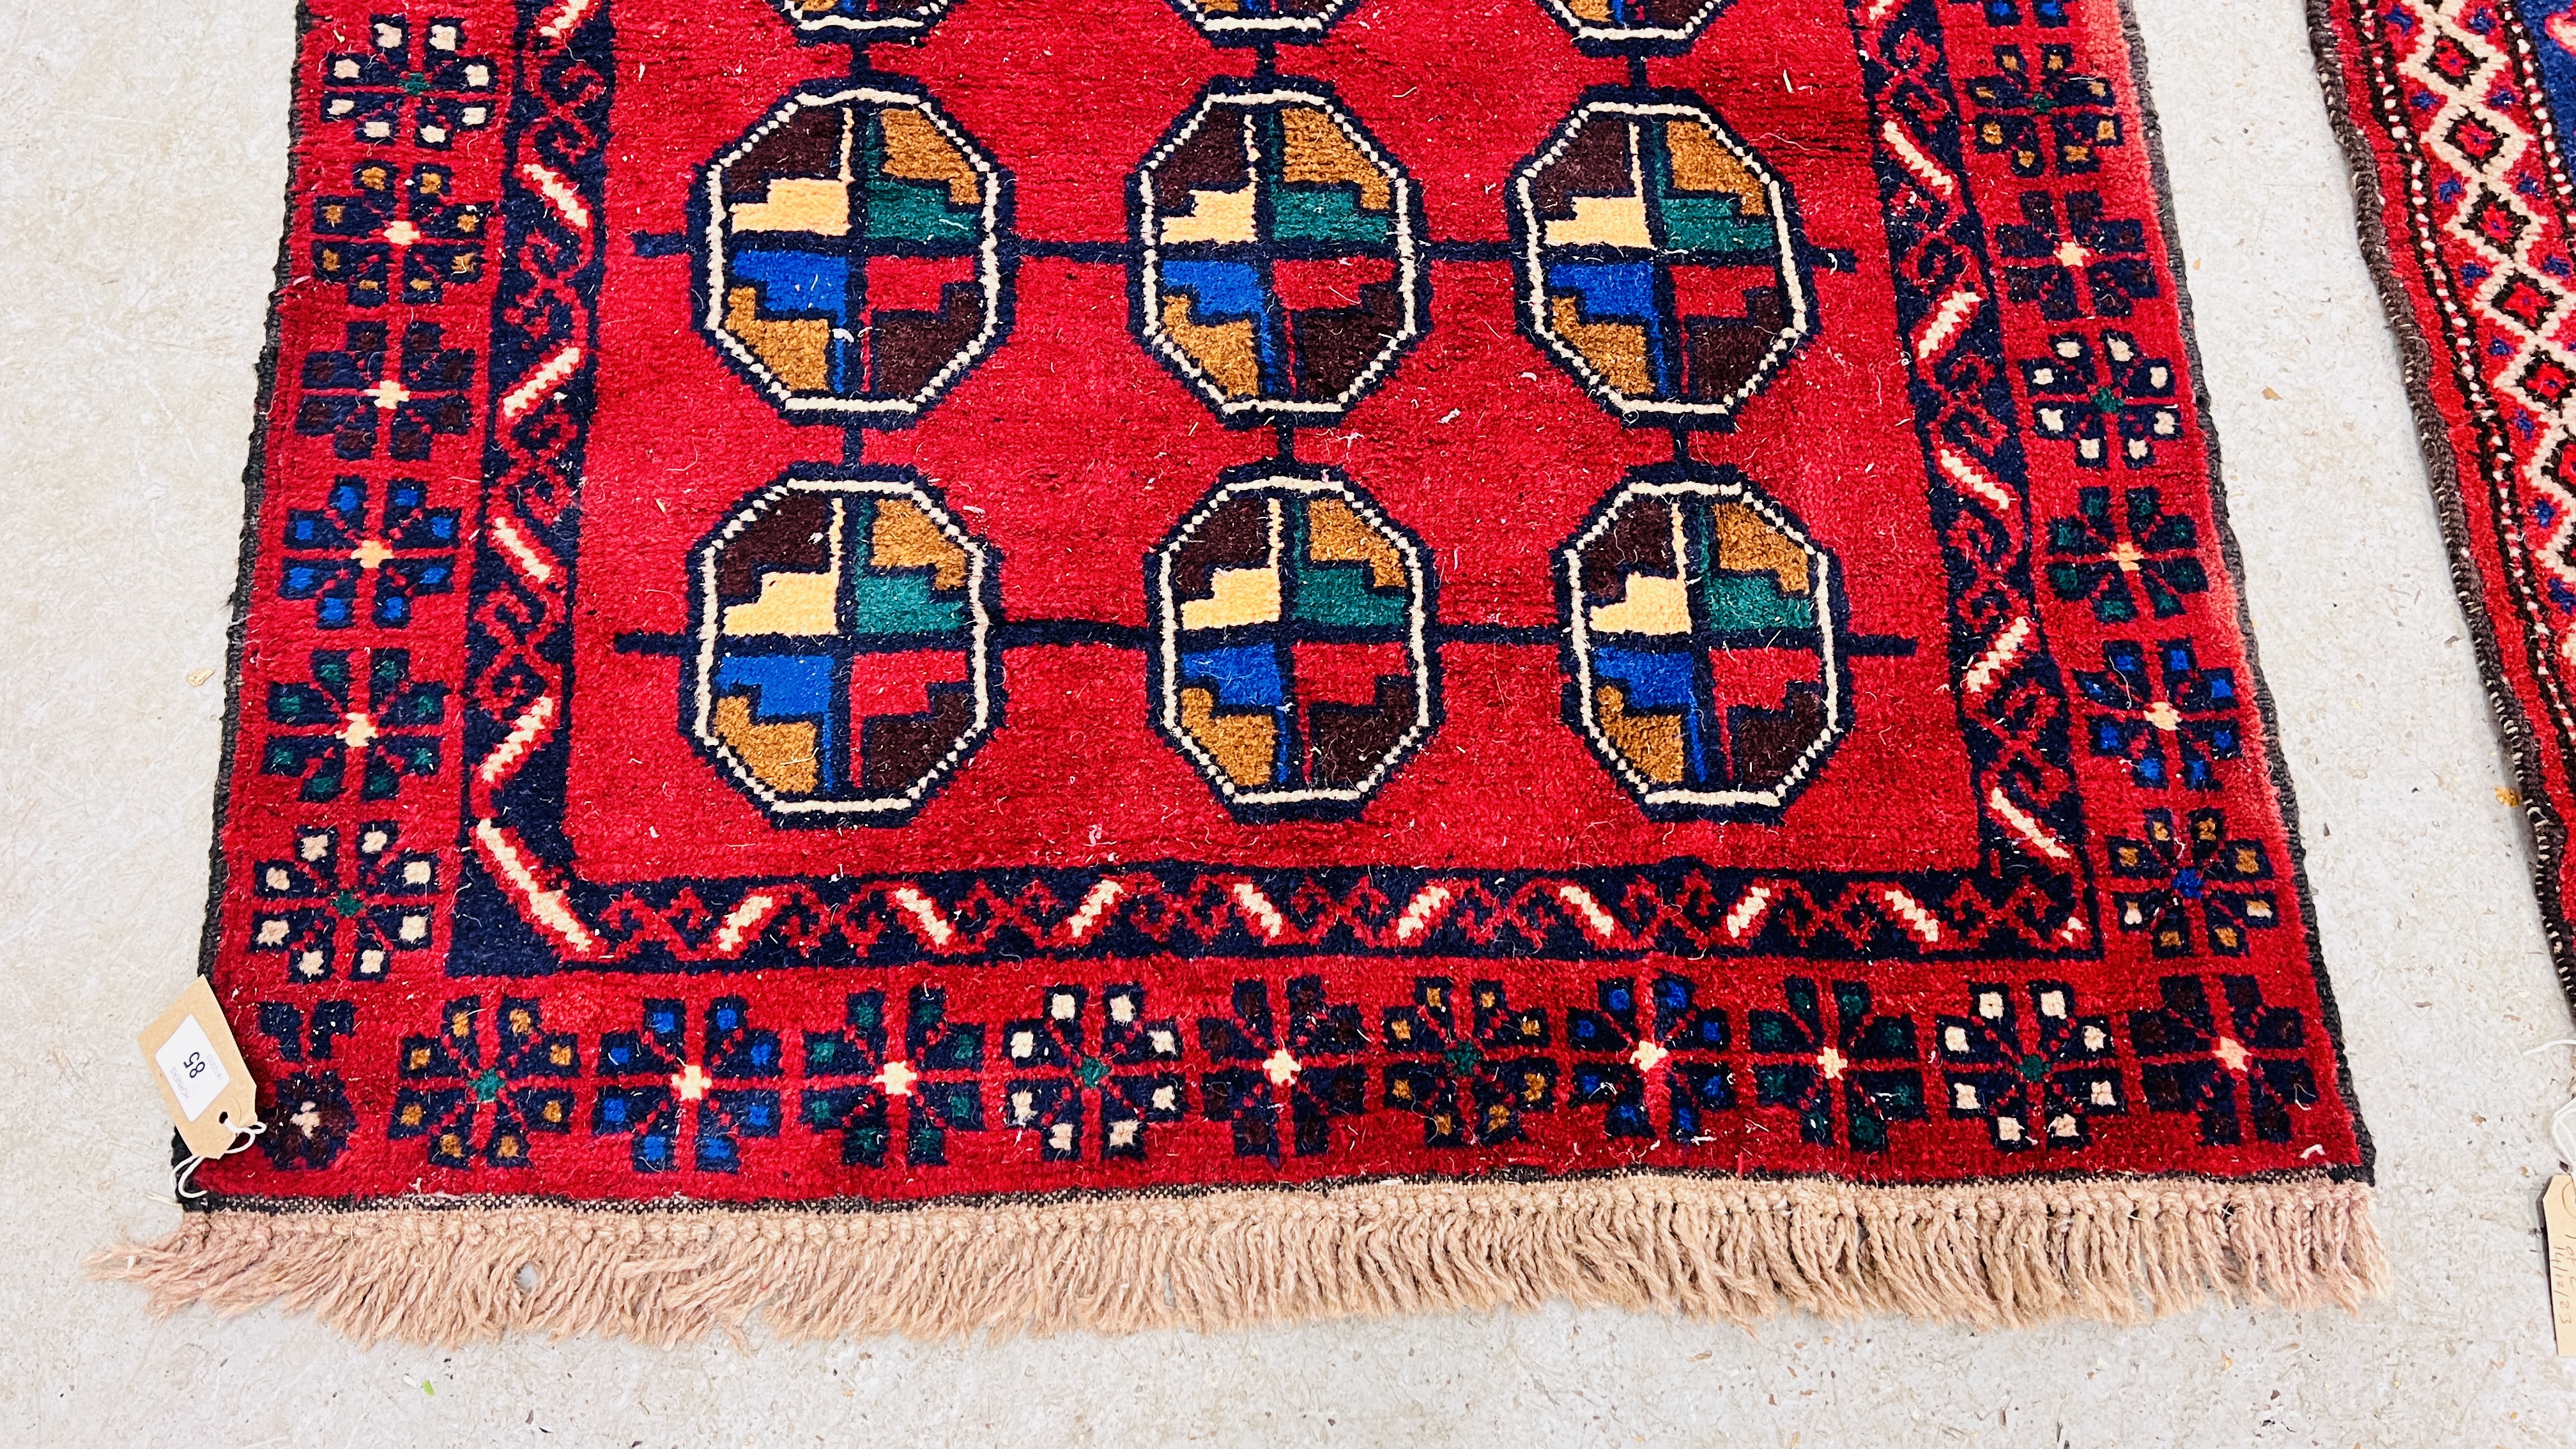 TWO RED / BLUE PATTERNED EASTERN RUGS EACH 133CM X 86CM. - Image 7 of 10